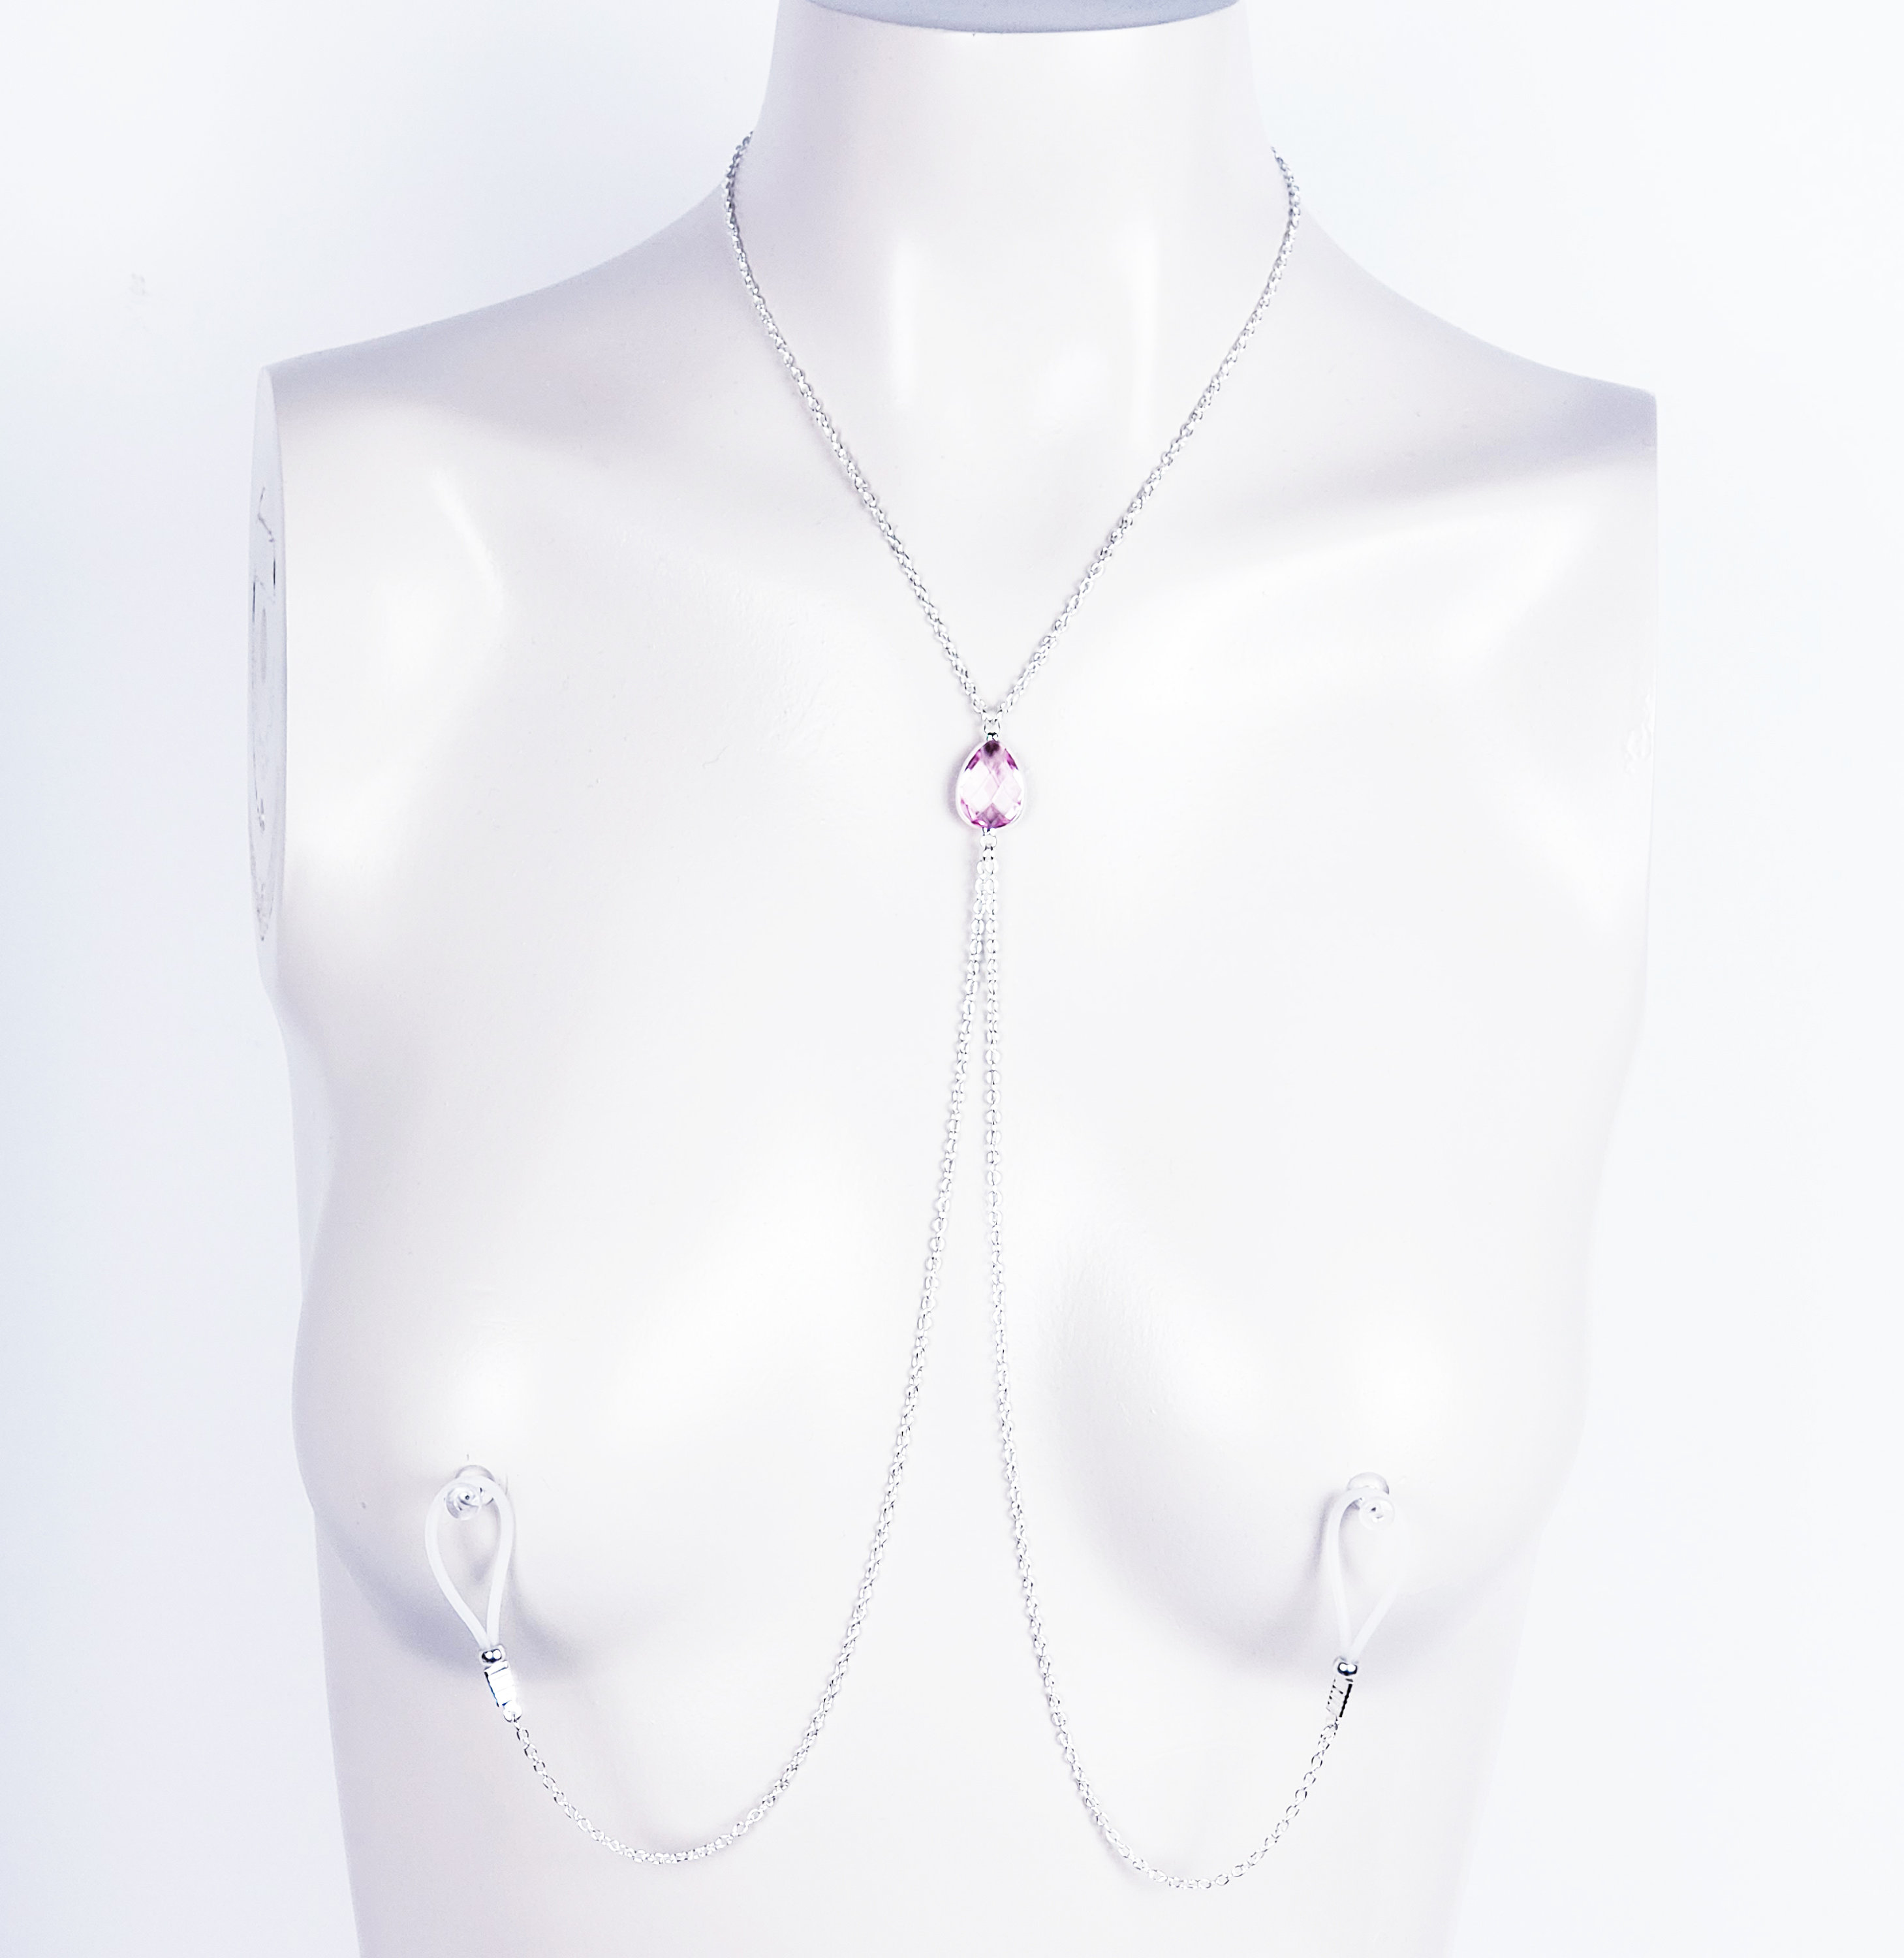 Erotic Necklace with Crystal and attached Nipple Chains. Choose Non Piercing Nipple Nooses or Nipple Clamps. MATURE, Submissive, BDSM photo